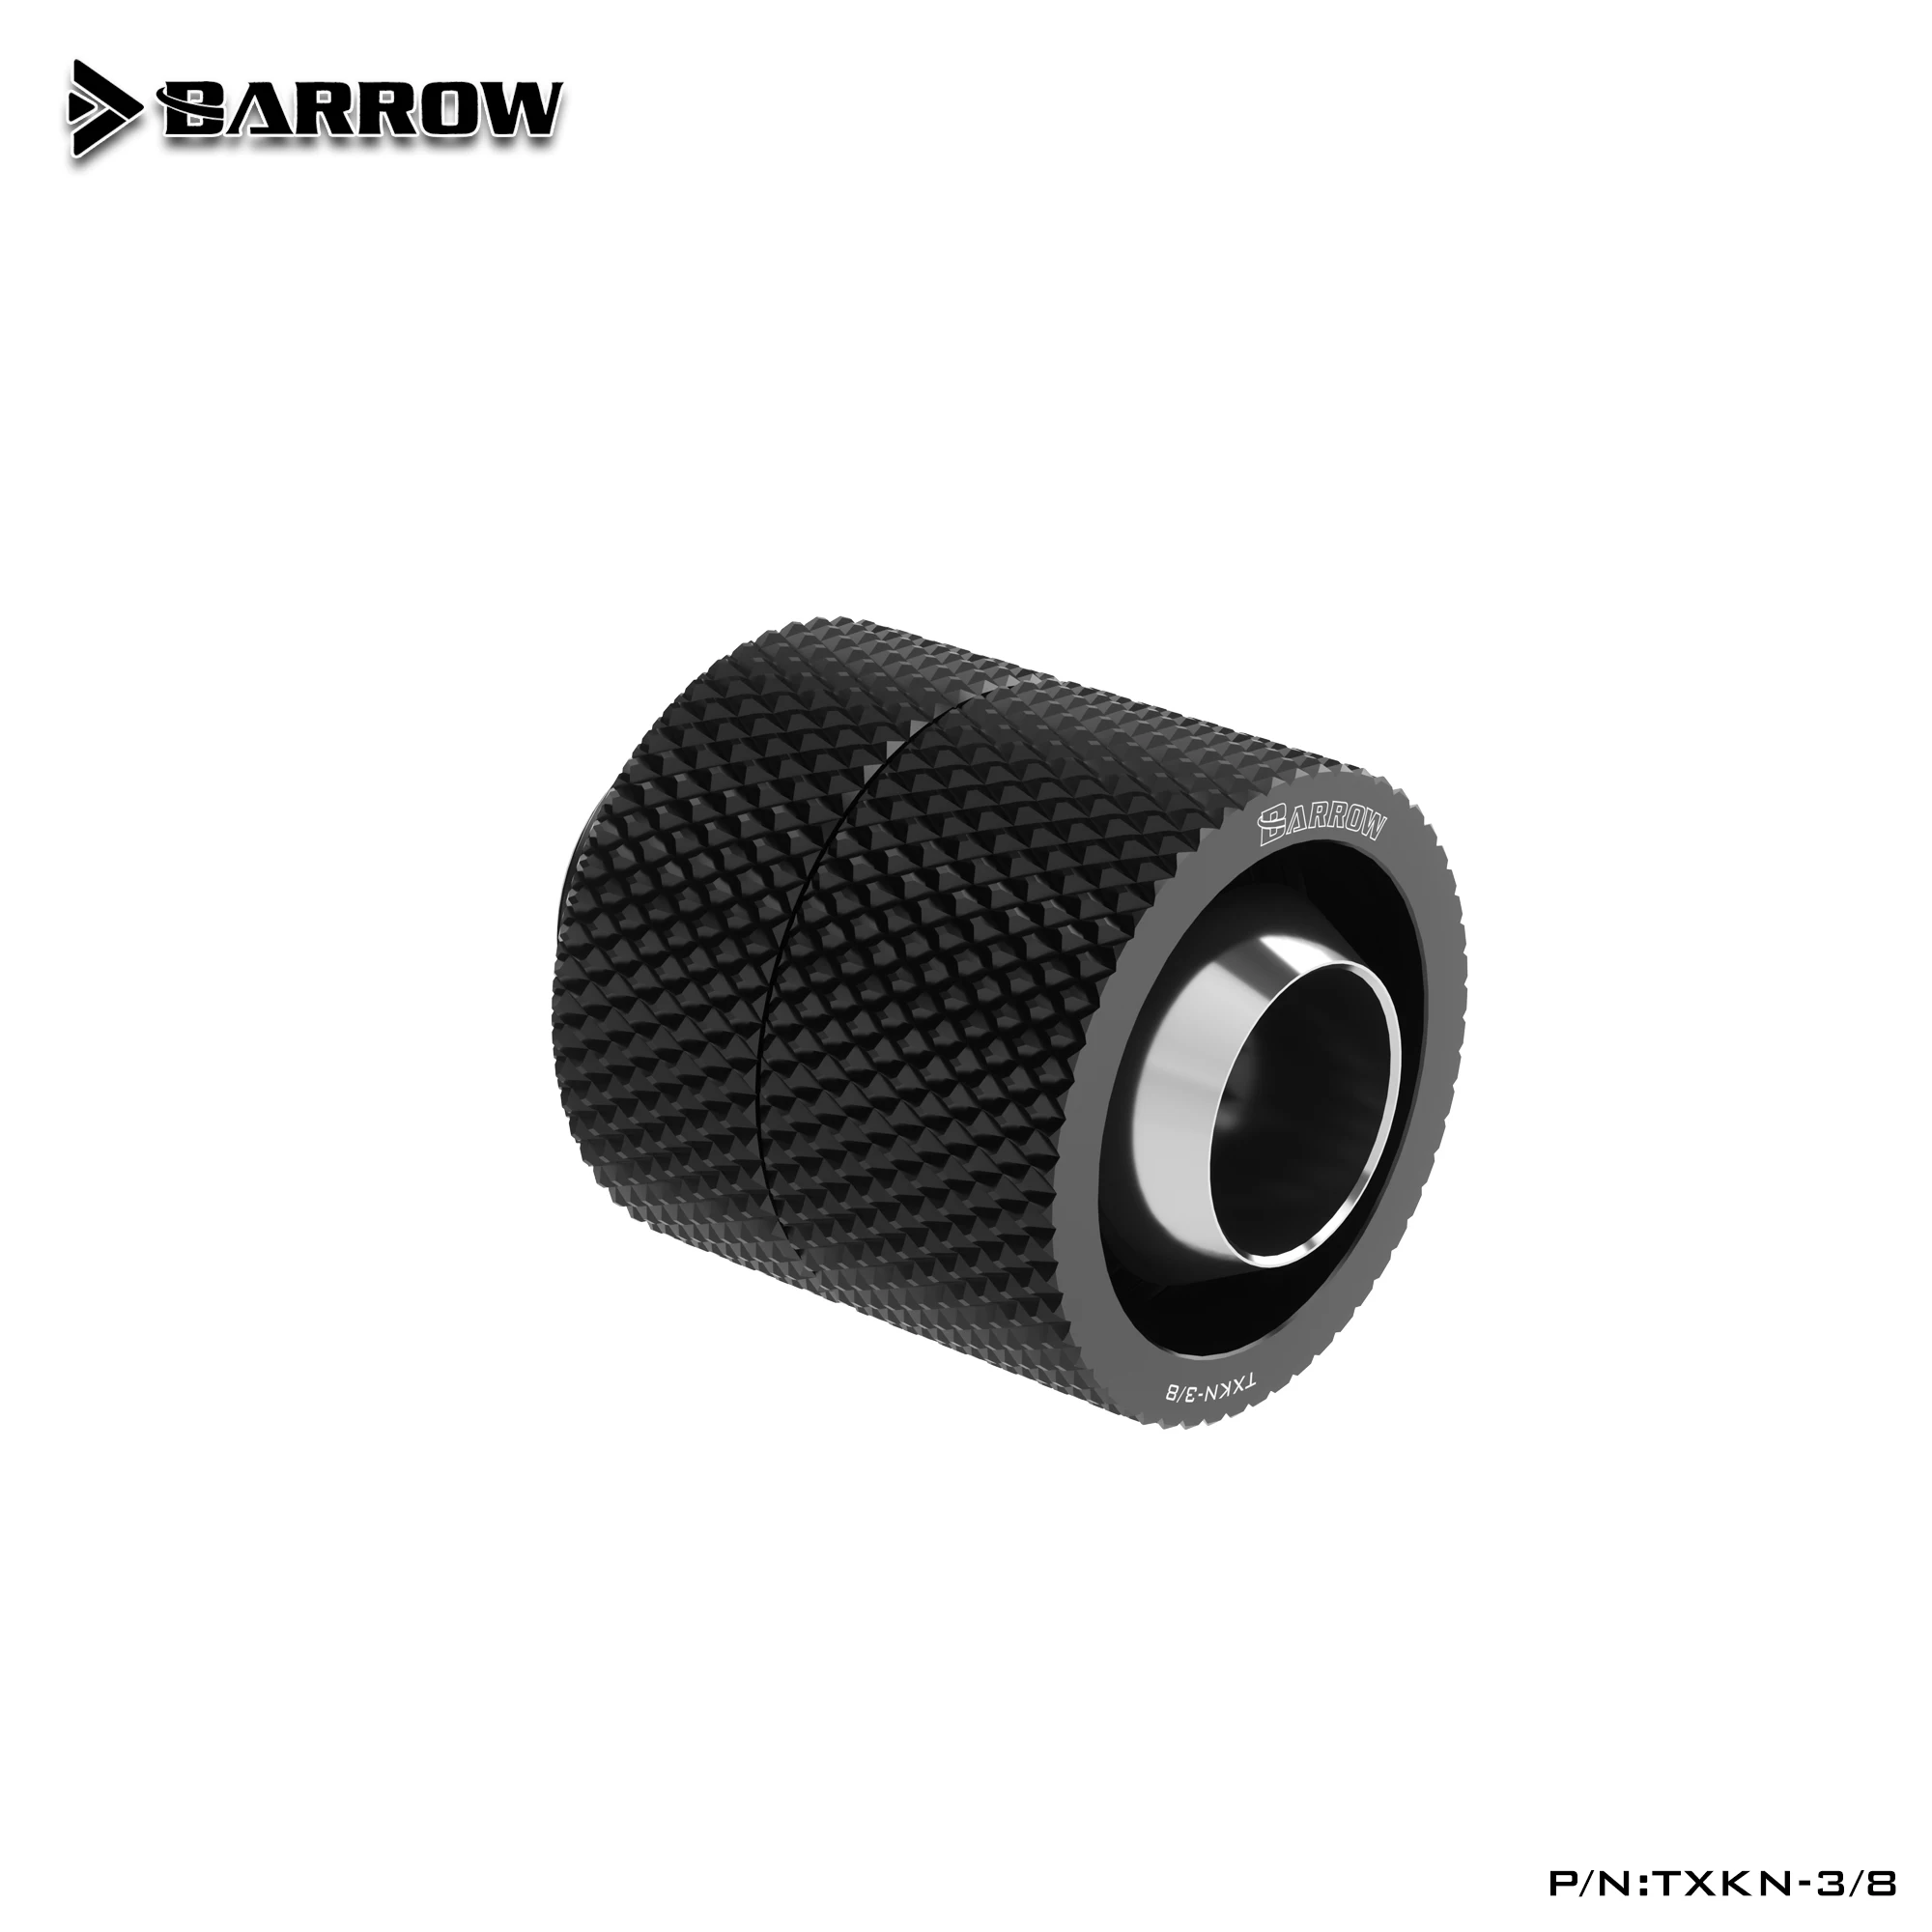 Barrow TXKN-3/8 Hose Fitting 3/8'' ID10mm + OD13mm Hose,3/8ID X 1/2OD Pipe Hand-Tighten Connector 360°Rotation Silver/Black barrow g1 4 id 1 2 od 3 4 hose compression joint fitting connector thkn 1 2 v3